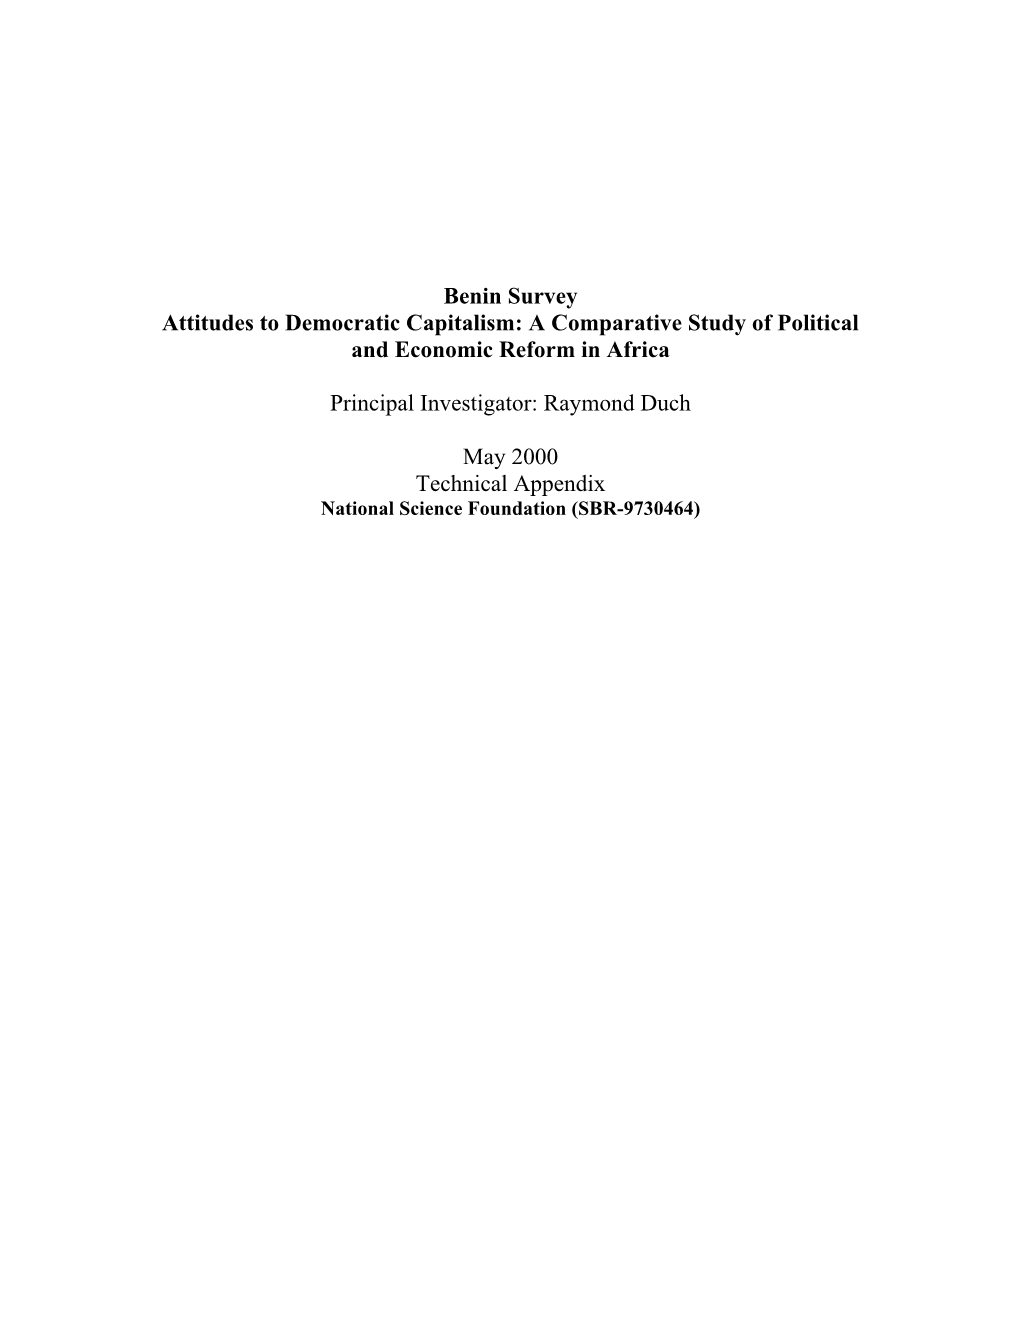 Benin Survey Attitudes to Democratic Capitalism: a Comparative Study of Political and Economic Reform in Africa